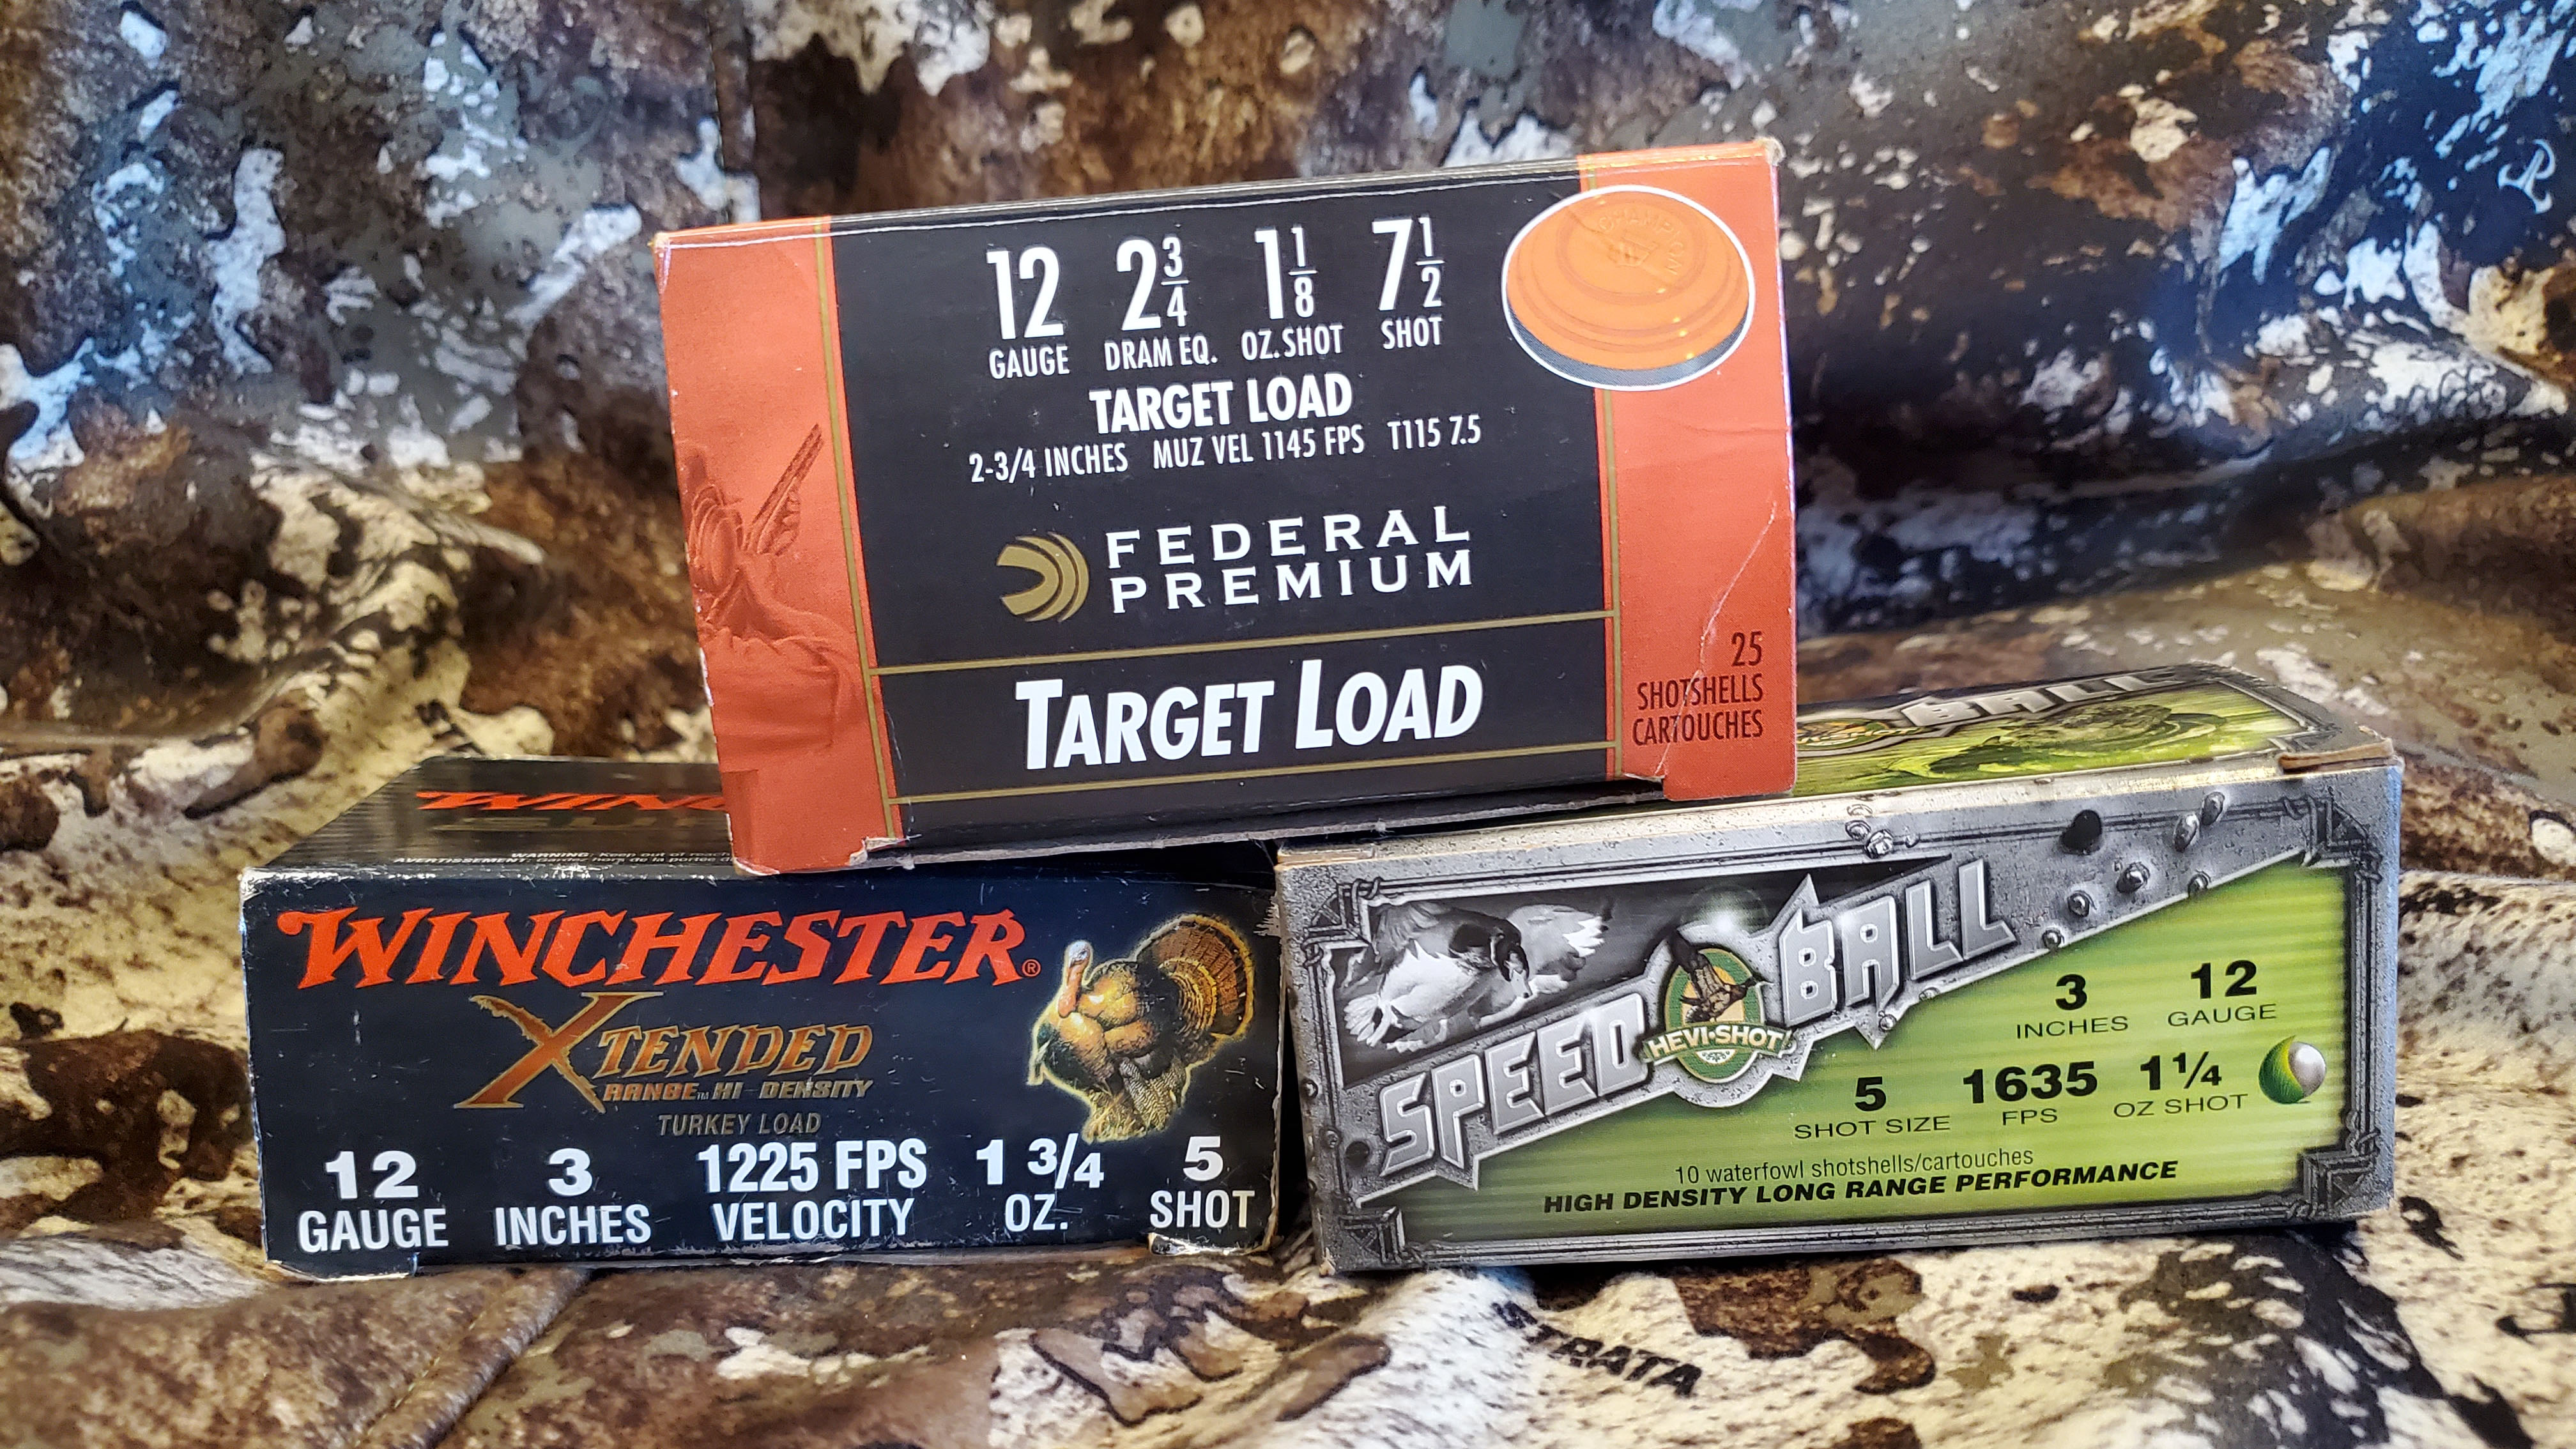 Ammo Collecting (Updated 12/30/13) - Page 2 